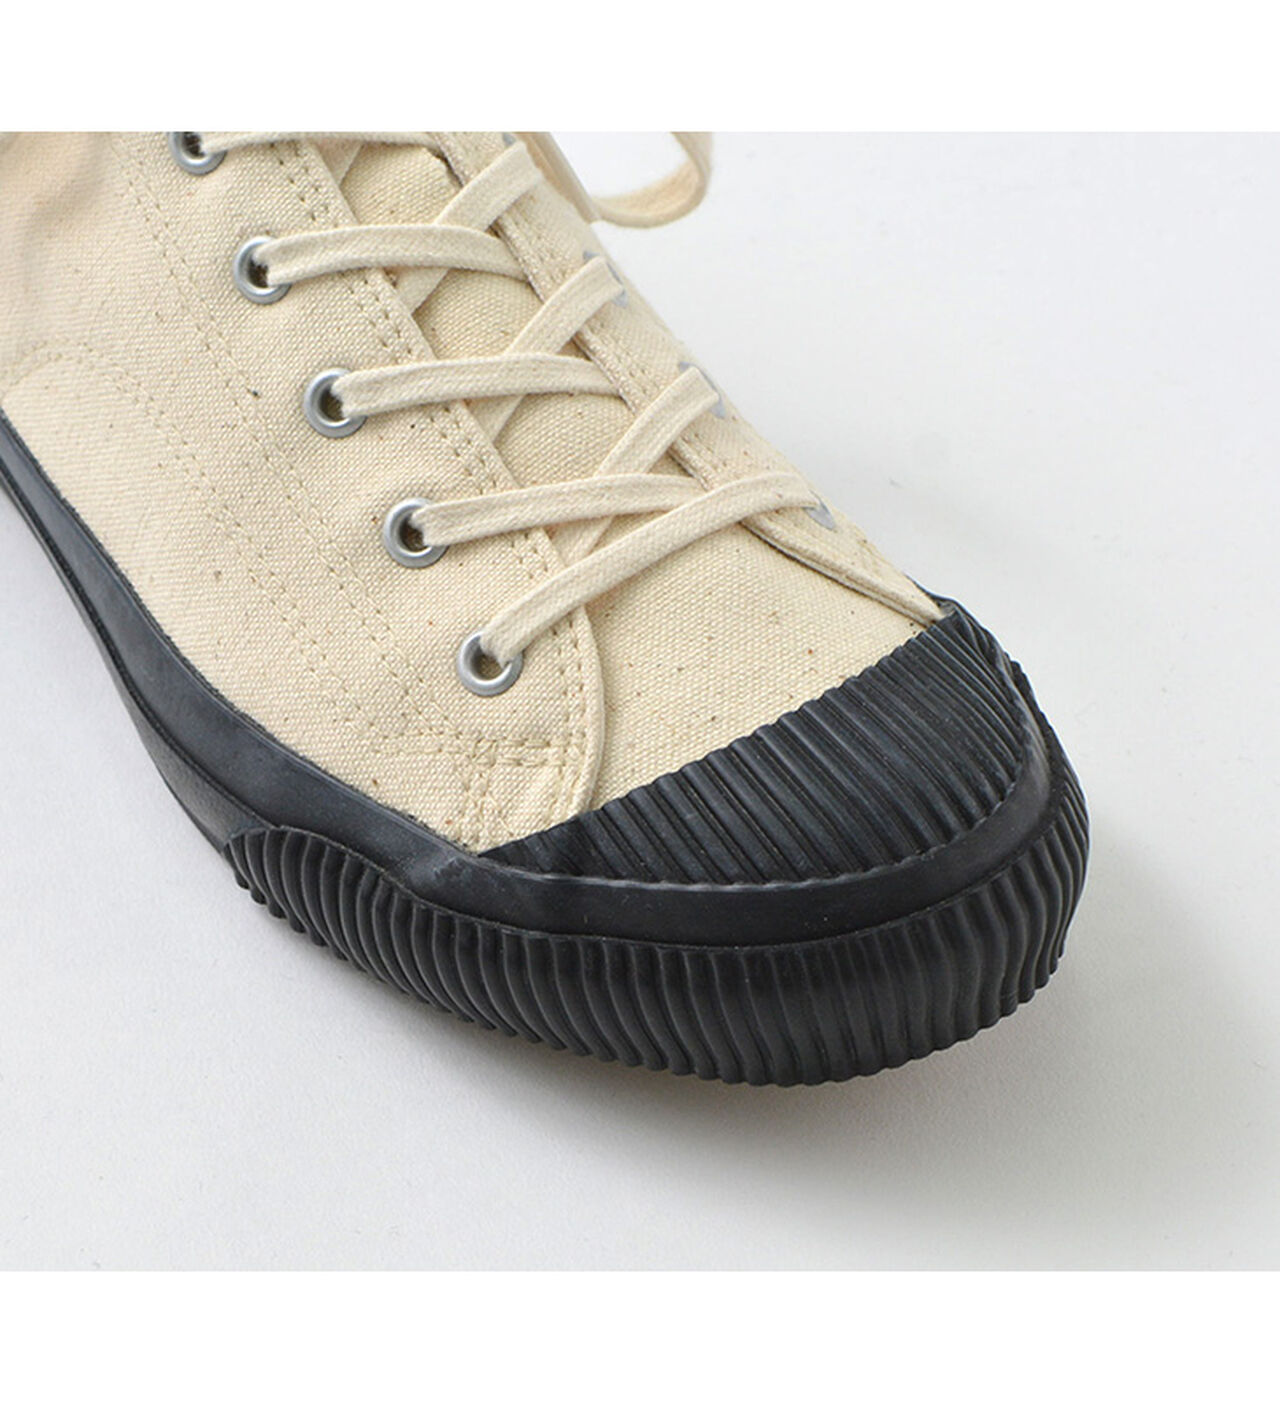 Shell Cap Low Canvas Sneakers,, large image number 10